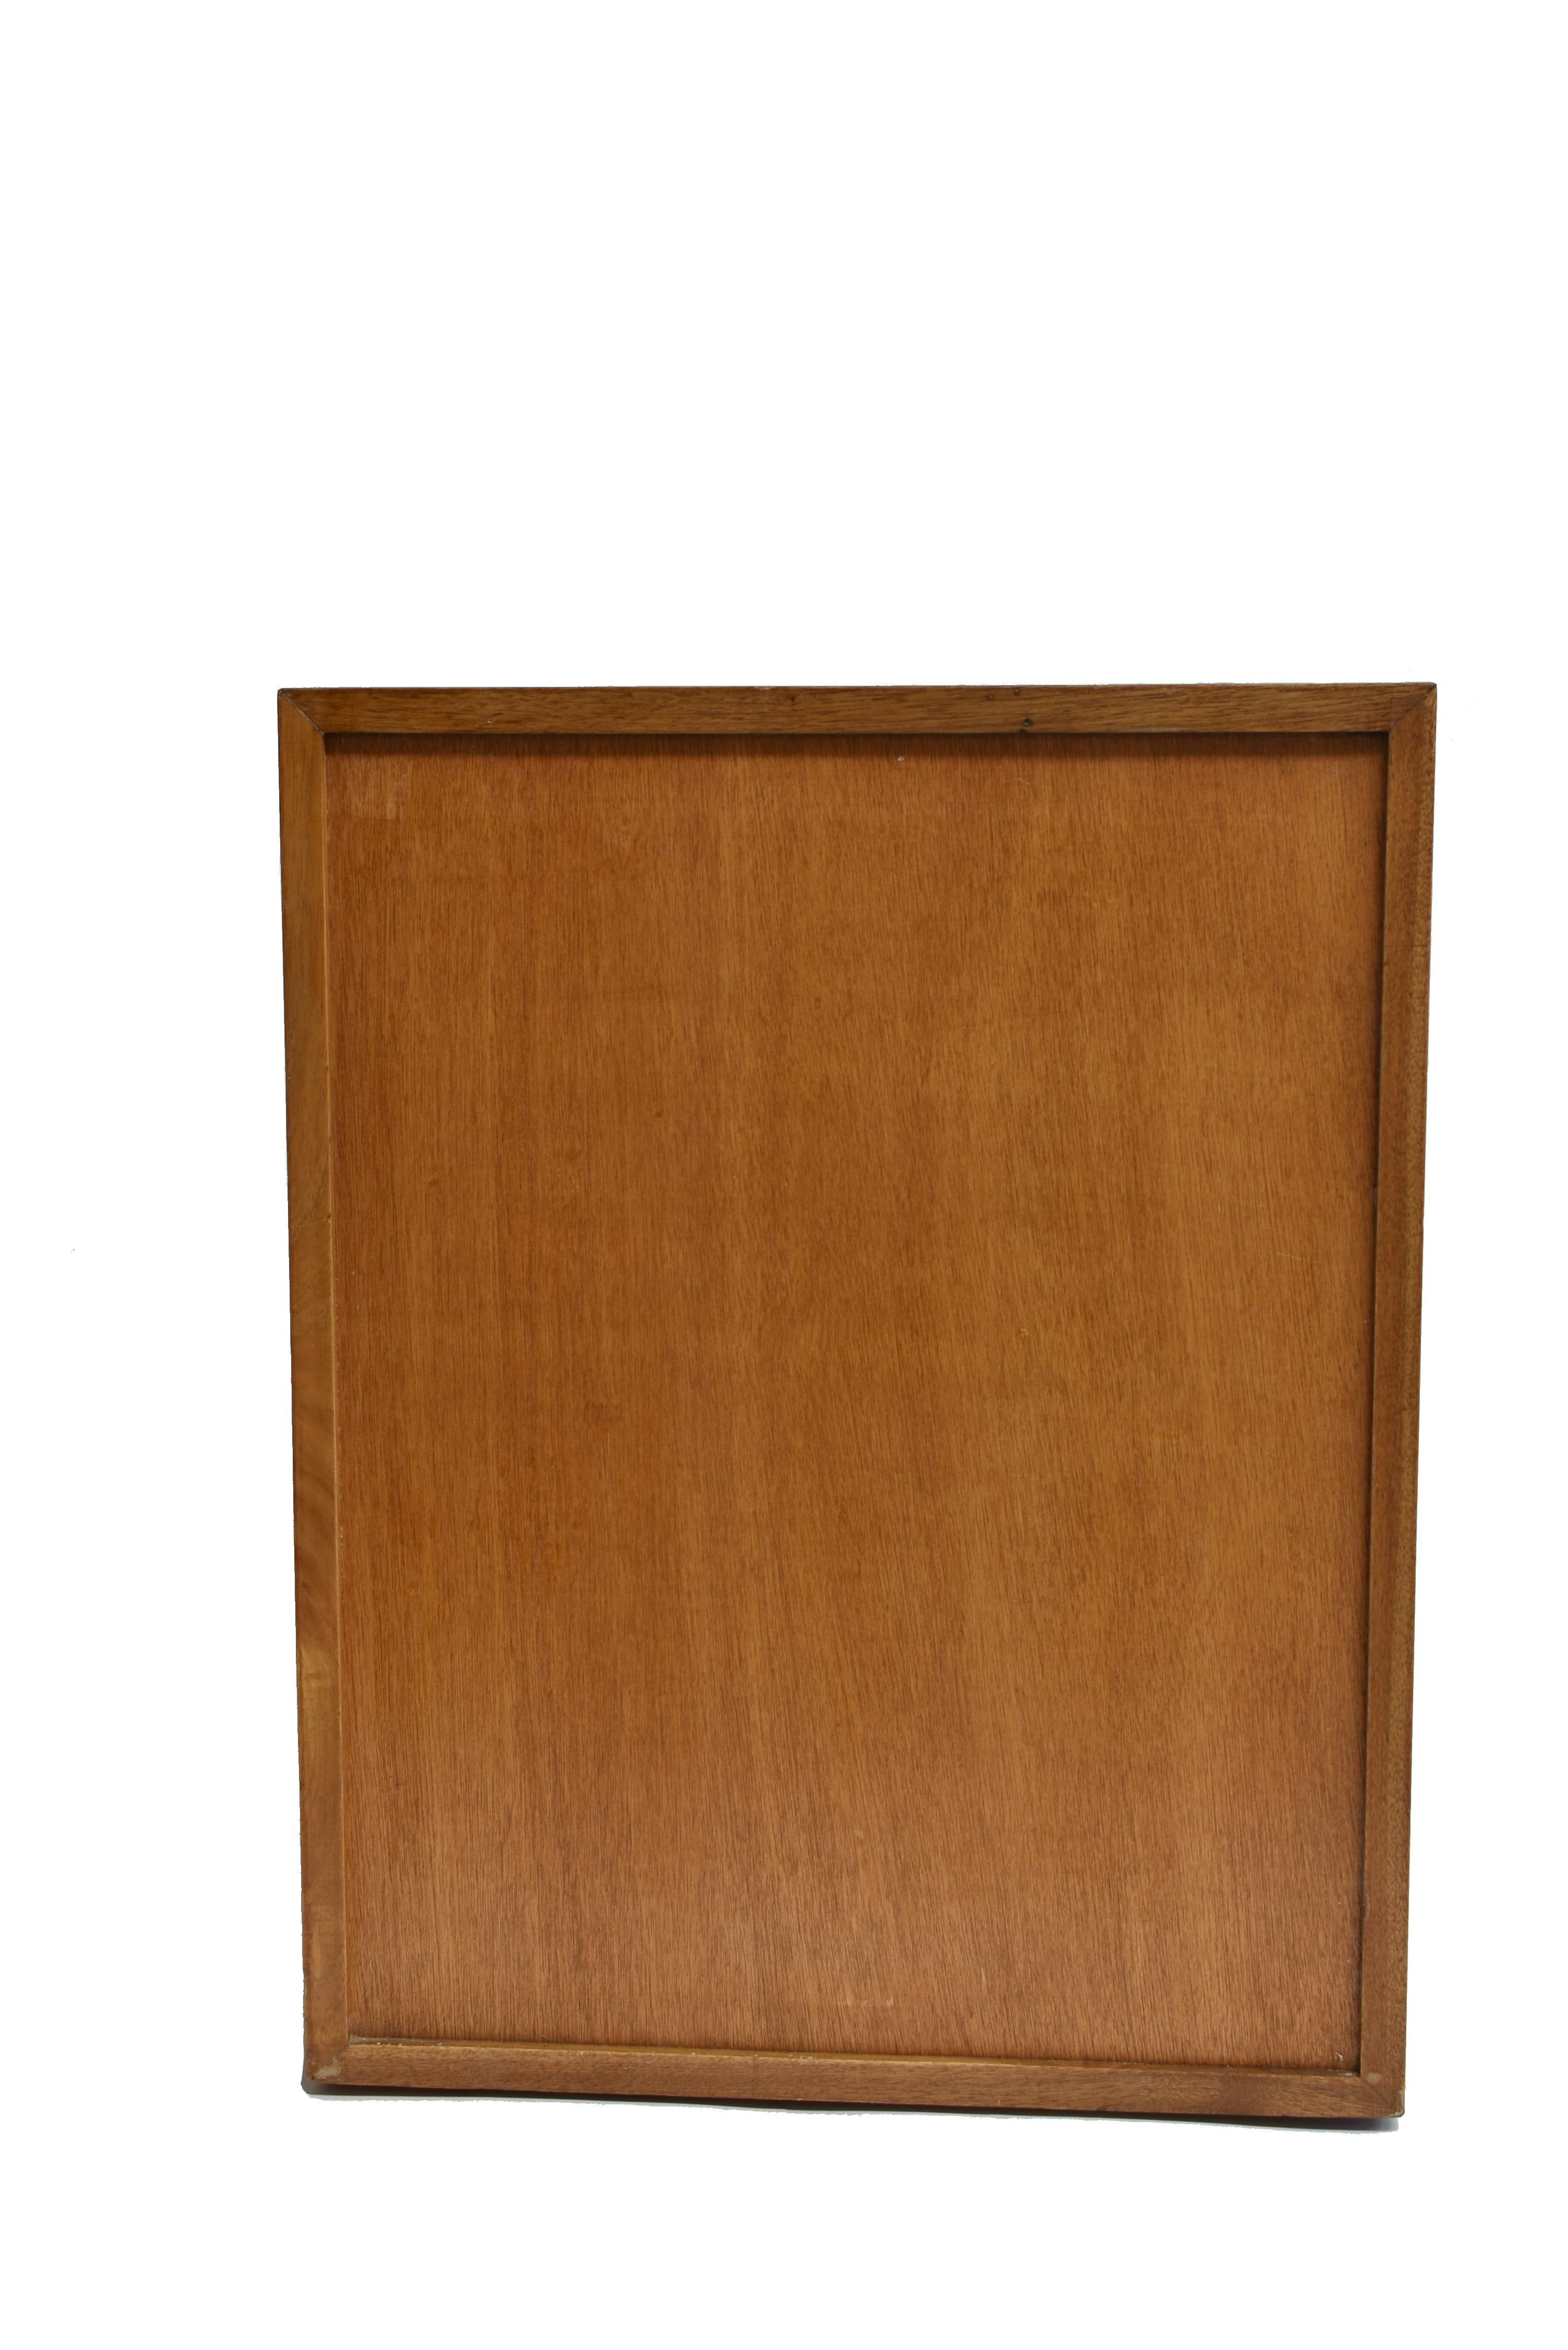 Japanese Tansu Small Solid Wood 12